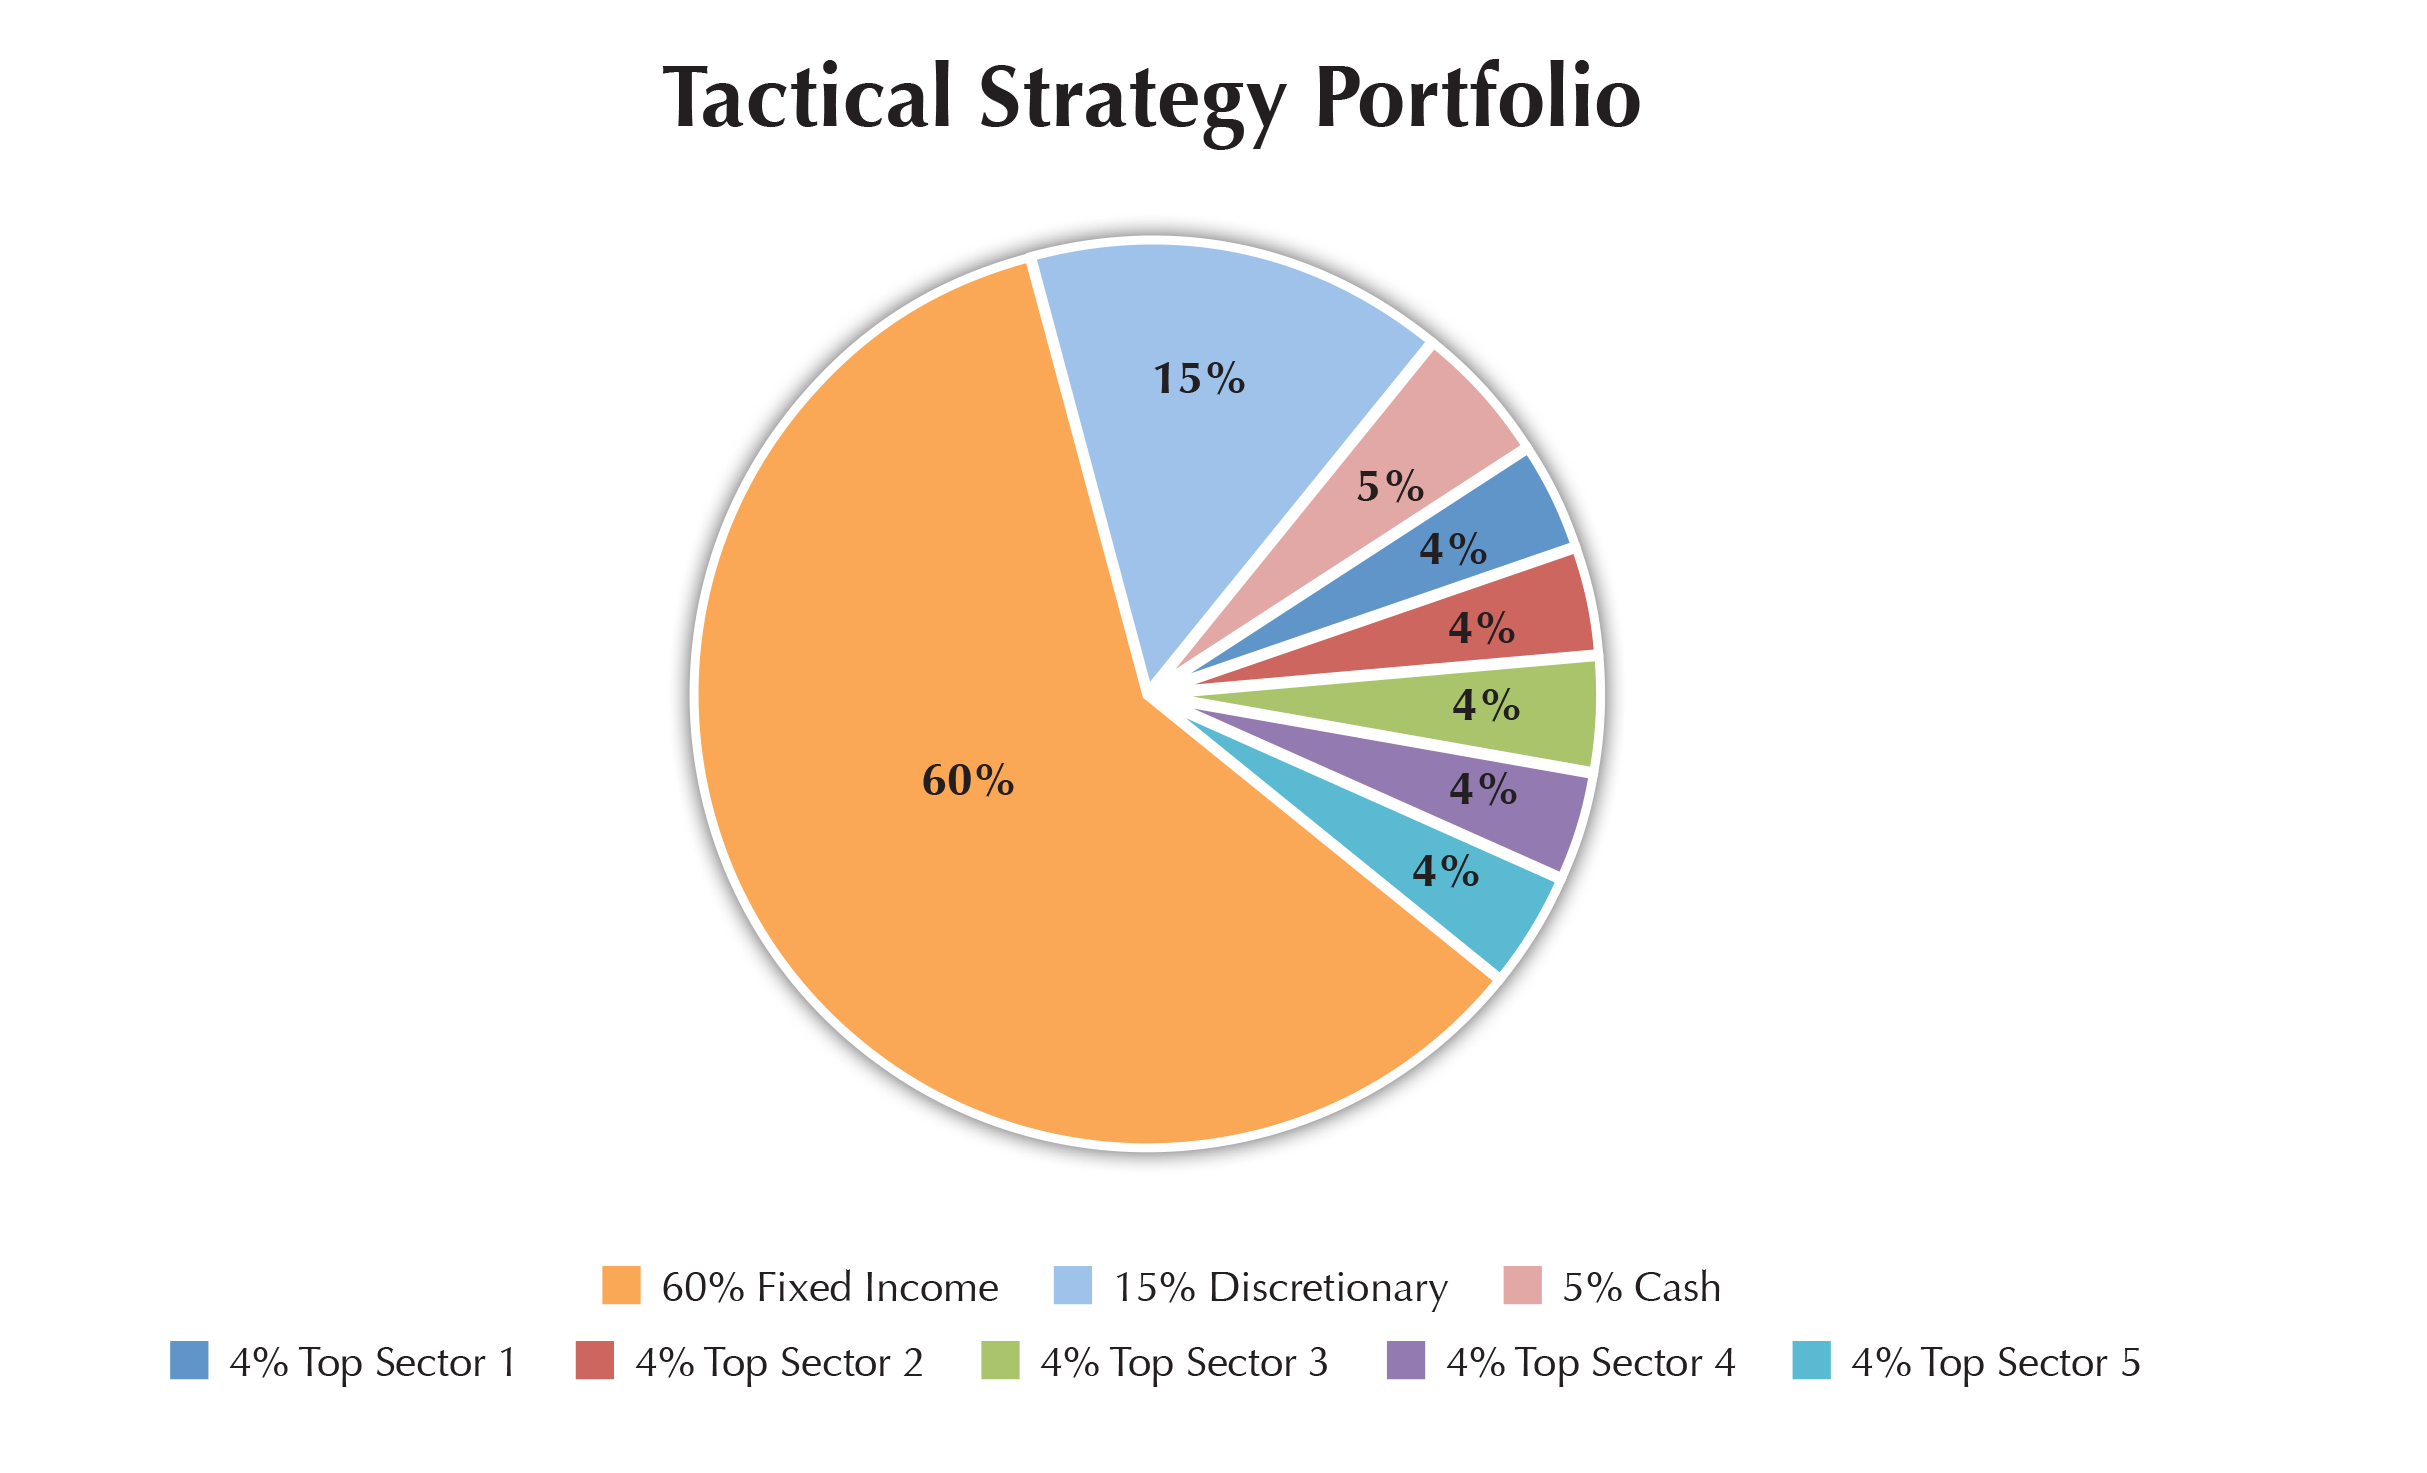 Pie chart showing tactical distribution of a portfolio.